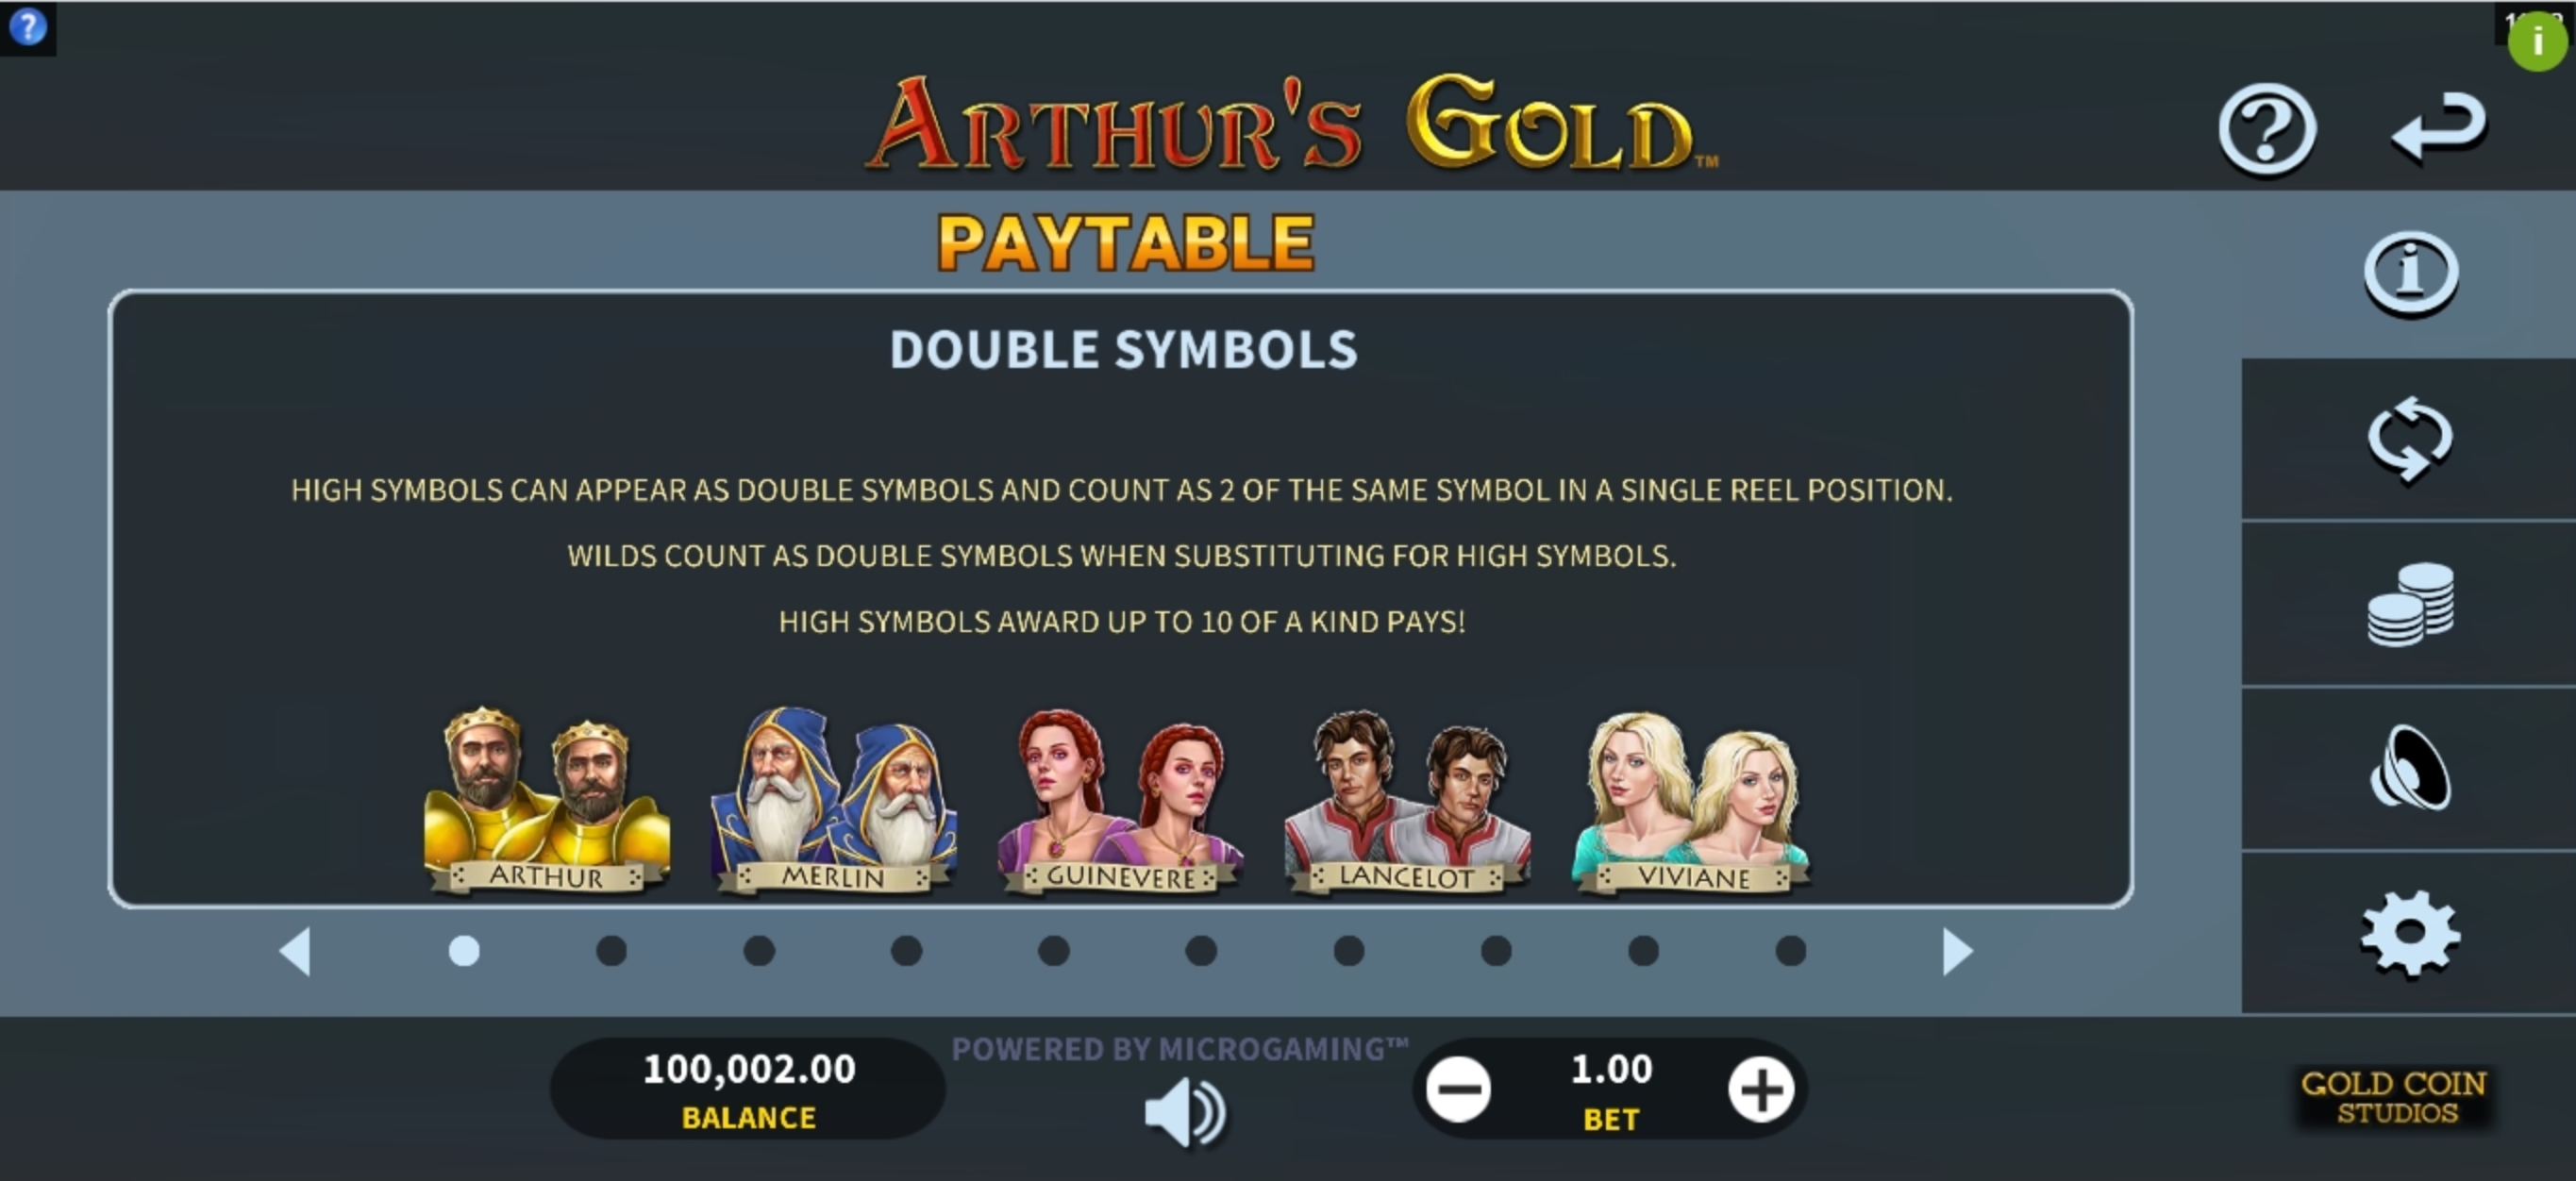 Info of Arthurs Gold Slot Game by Gold Coin Studios